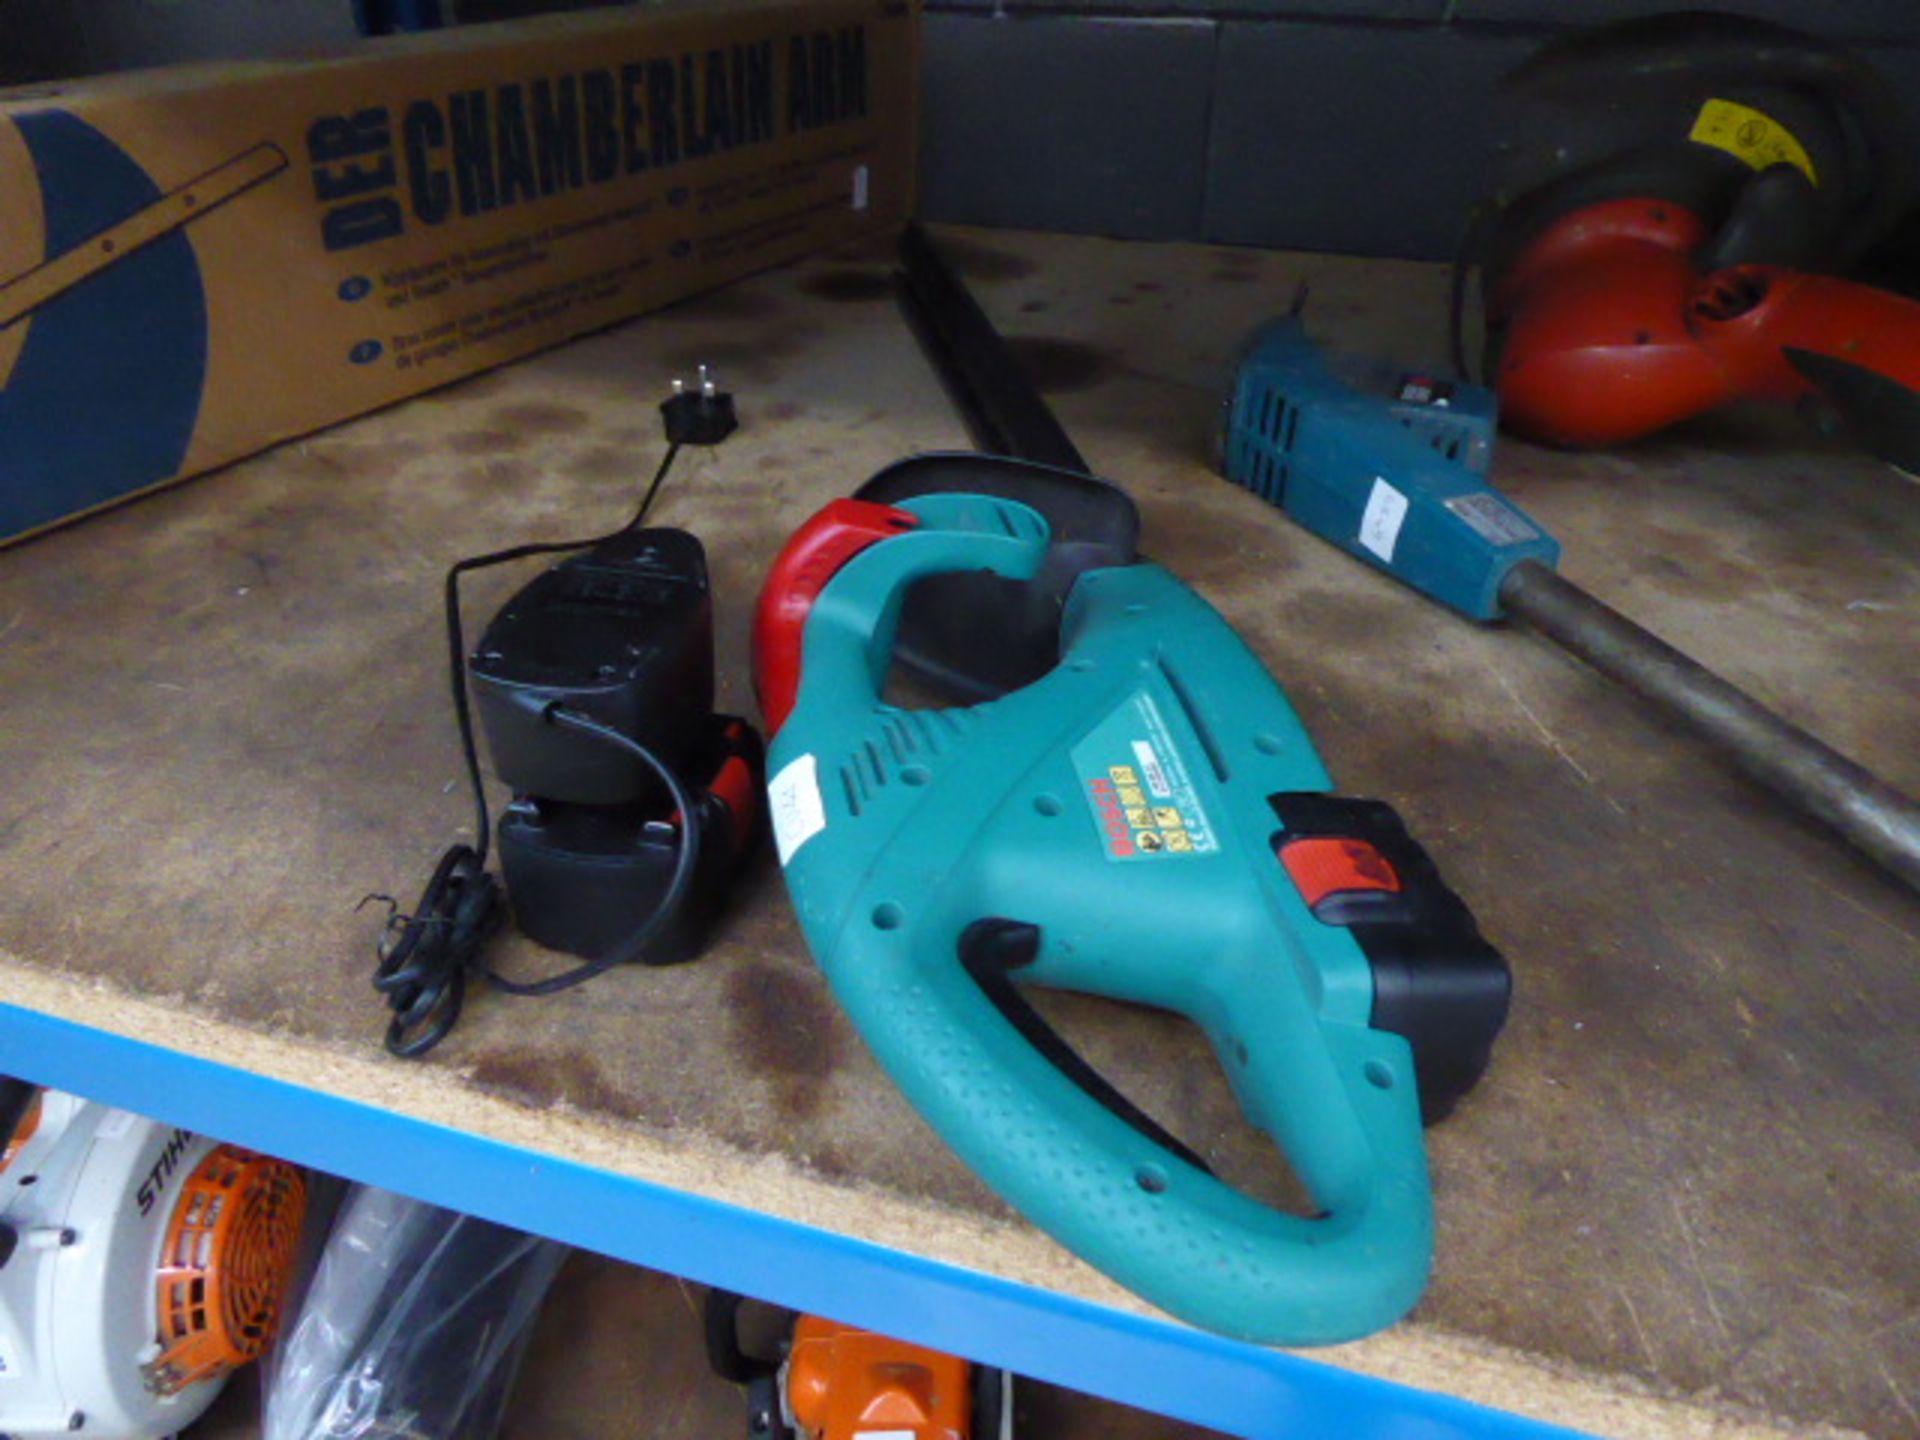 Bosch cordless hedge trimmer with tow batteries and a charger